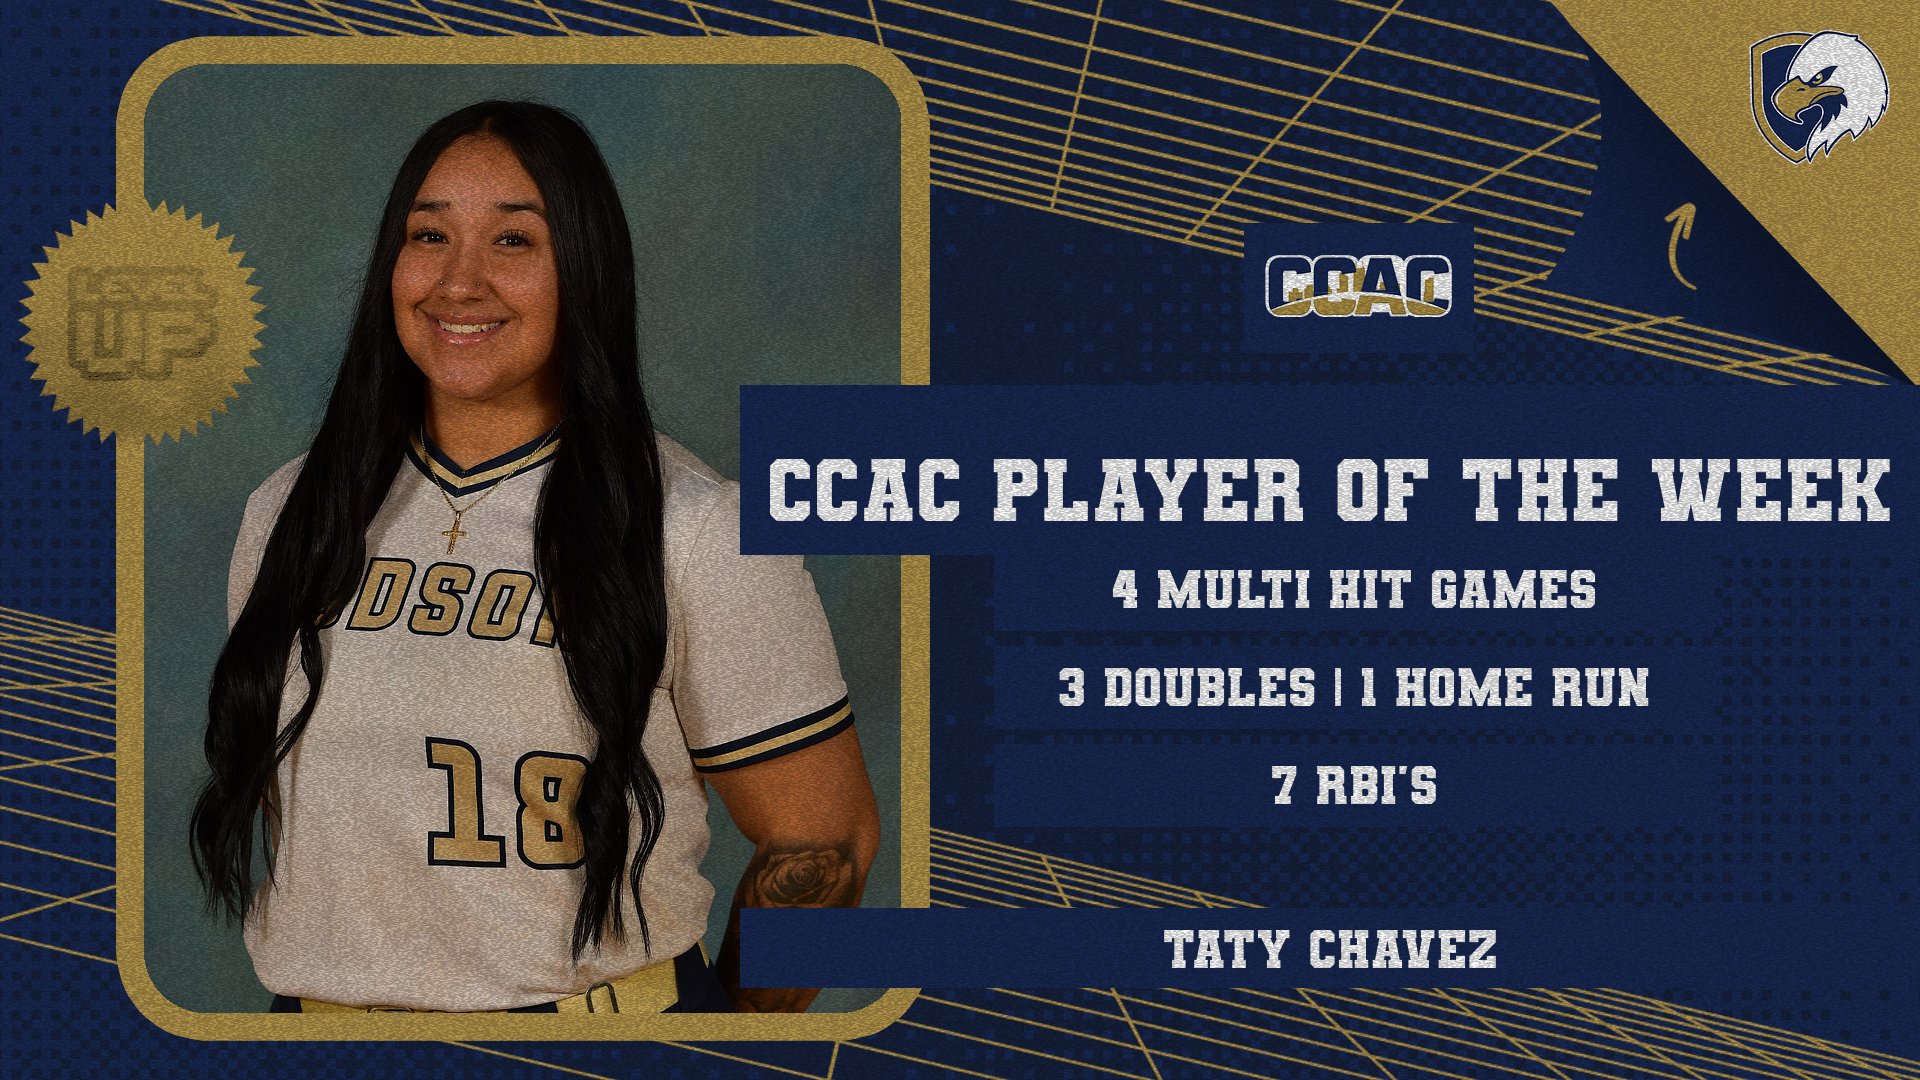 Chavez Named CCAC Player Of The Week